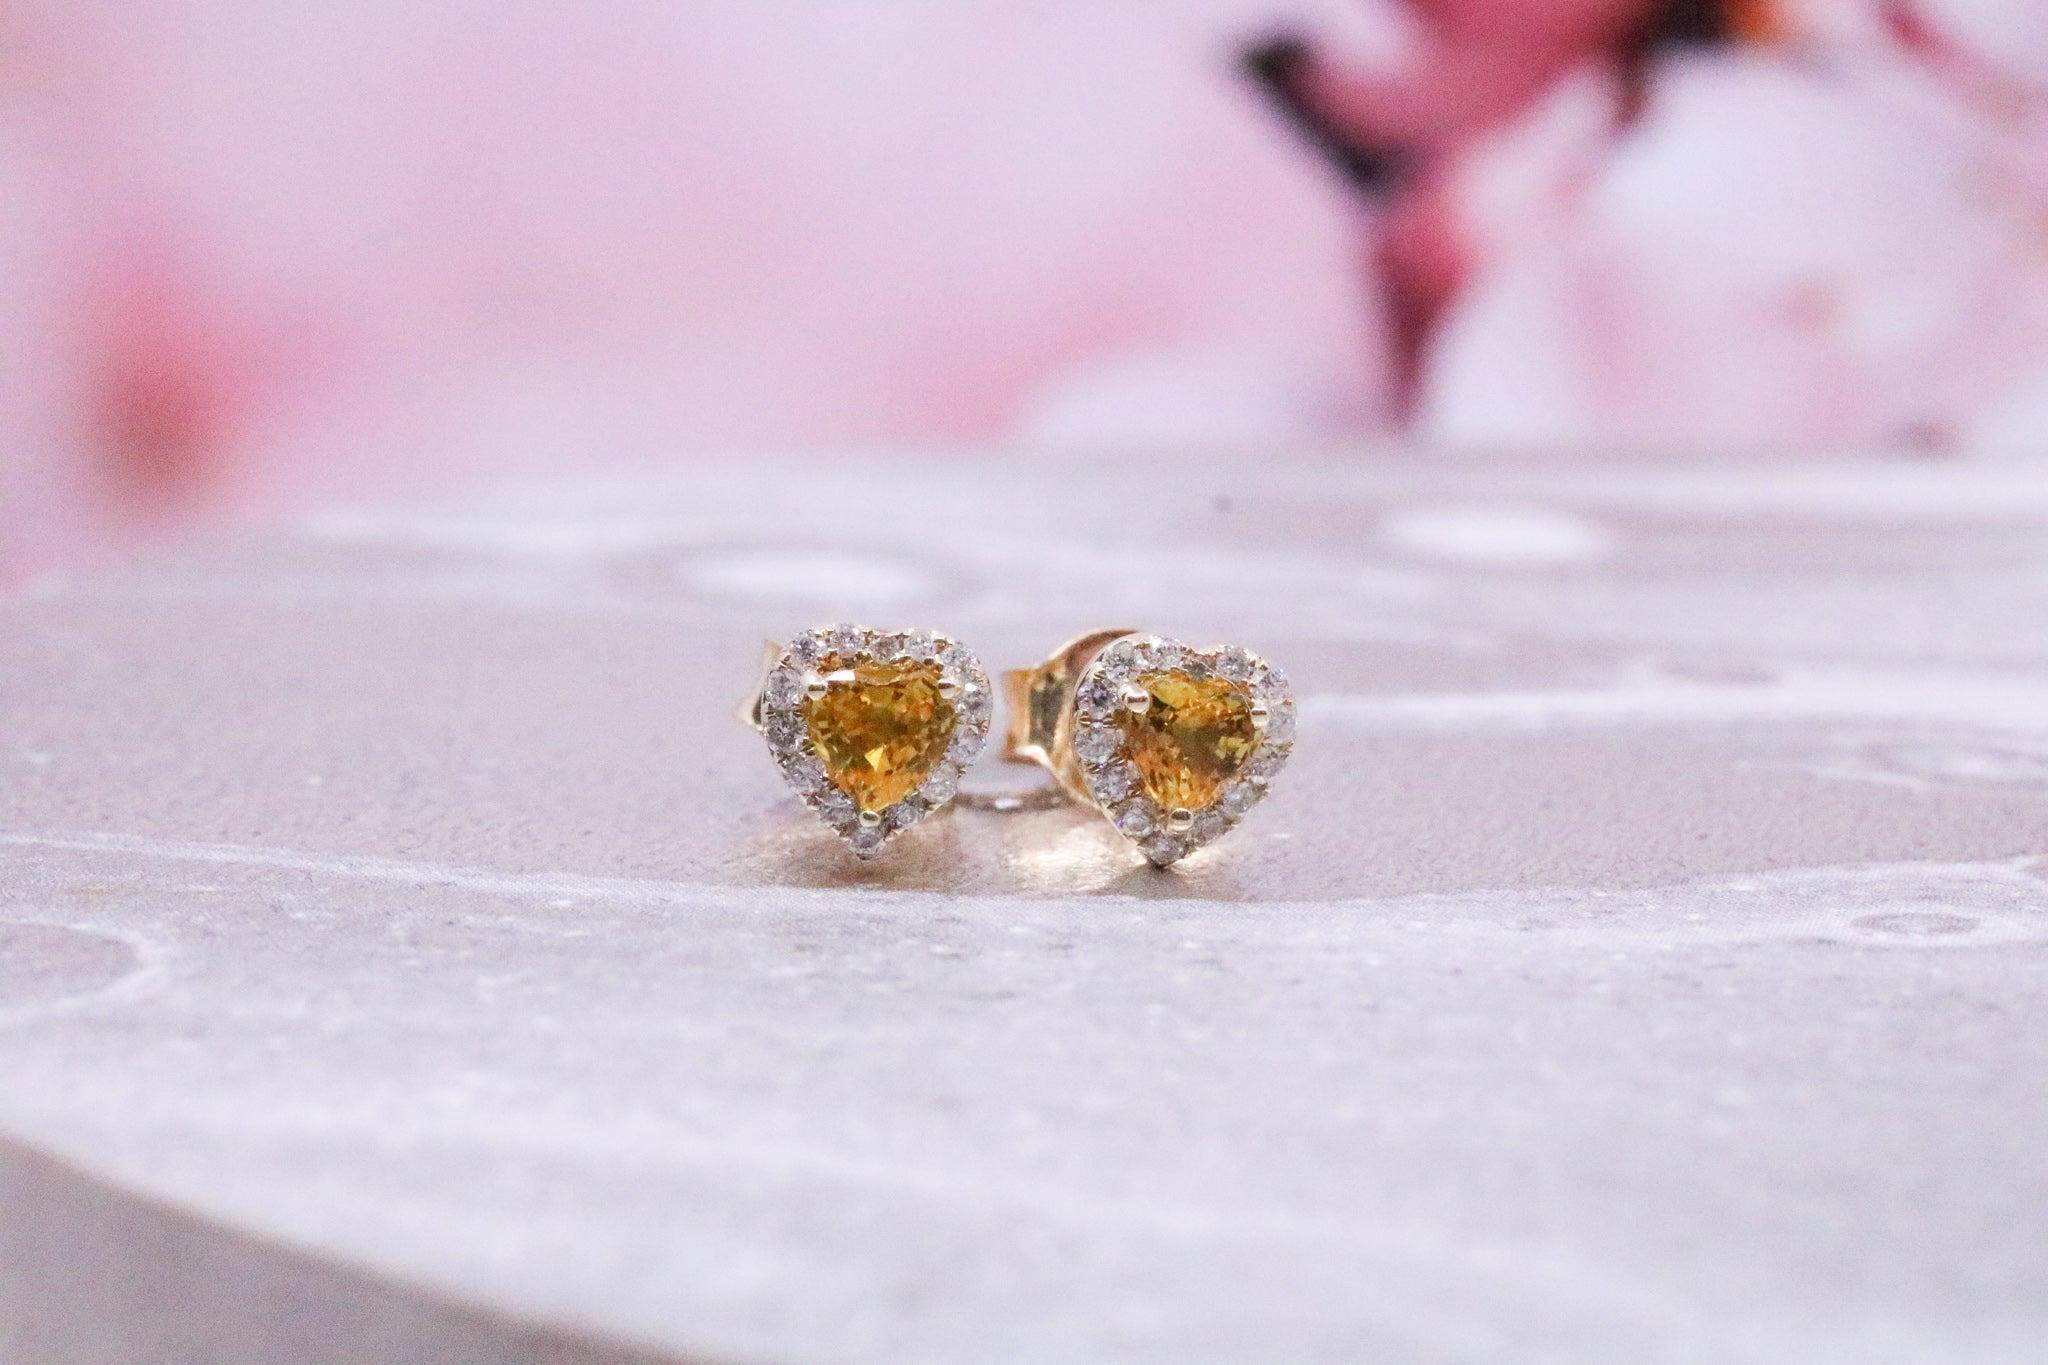 9ct Gold Earrings Yellow Sapphire- DR4002 - Hallmark Jewellers Formby & The Jewellers Bench Widnes